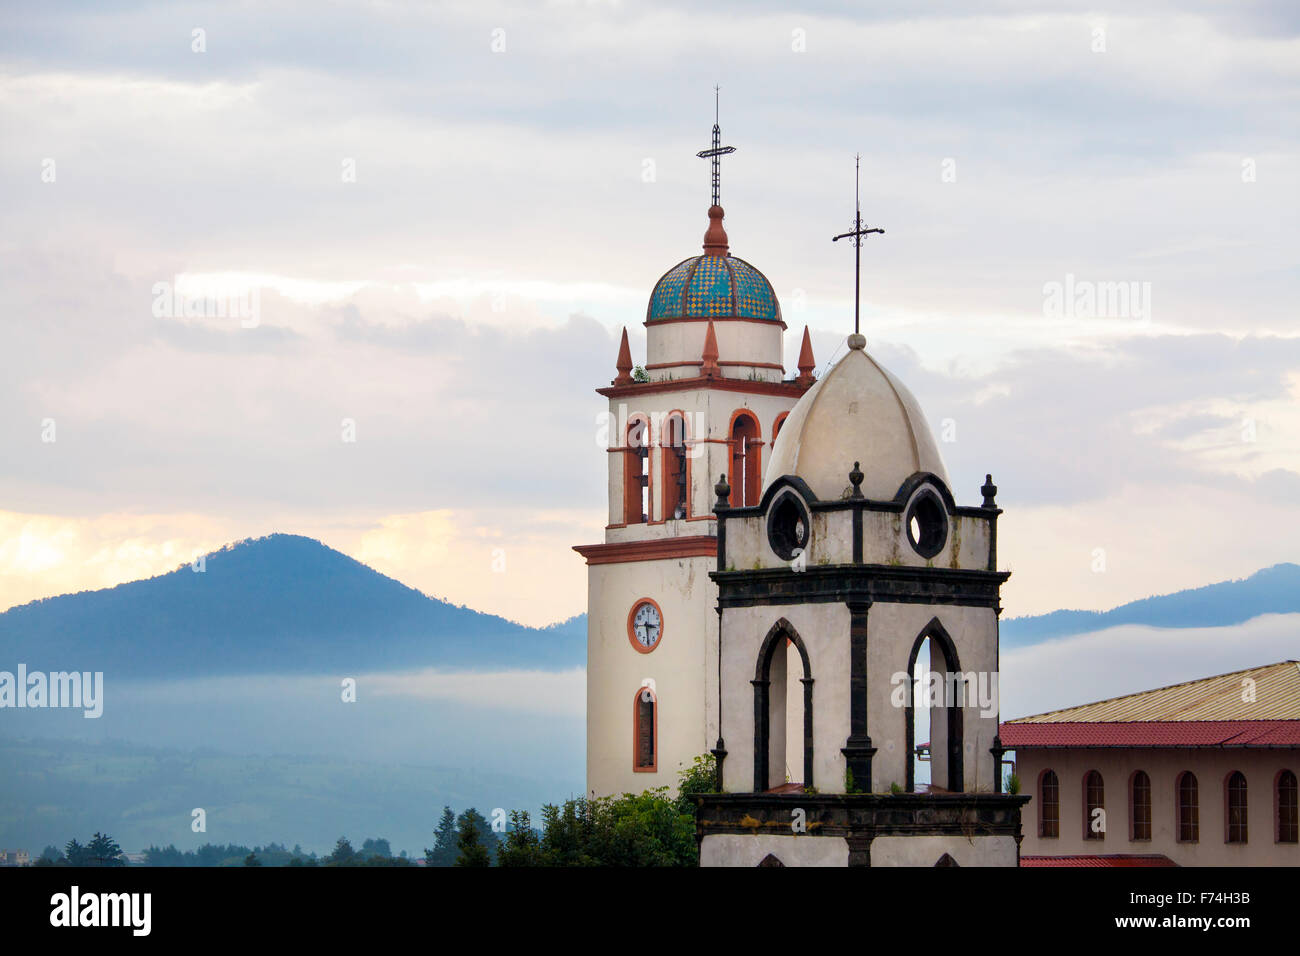 Church towers at dusk in the town famous for its guitar artisans, Paracho, Michoacan, Mexico. Stock Photo